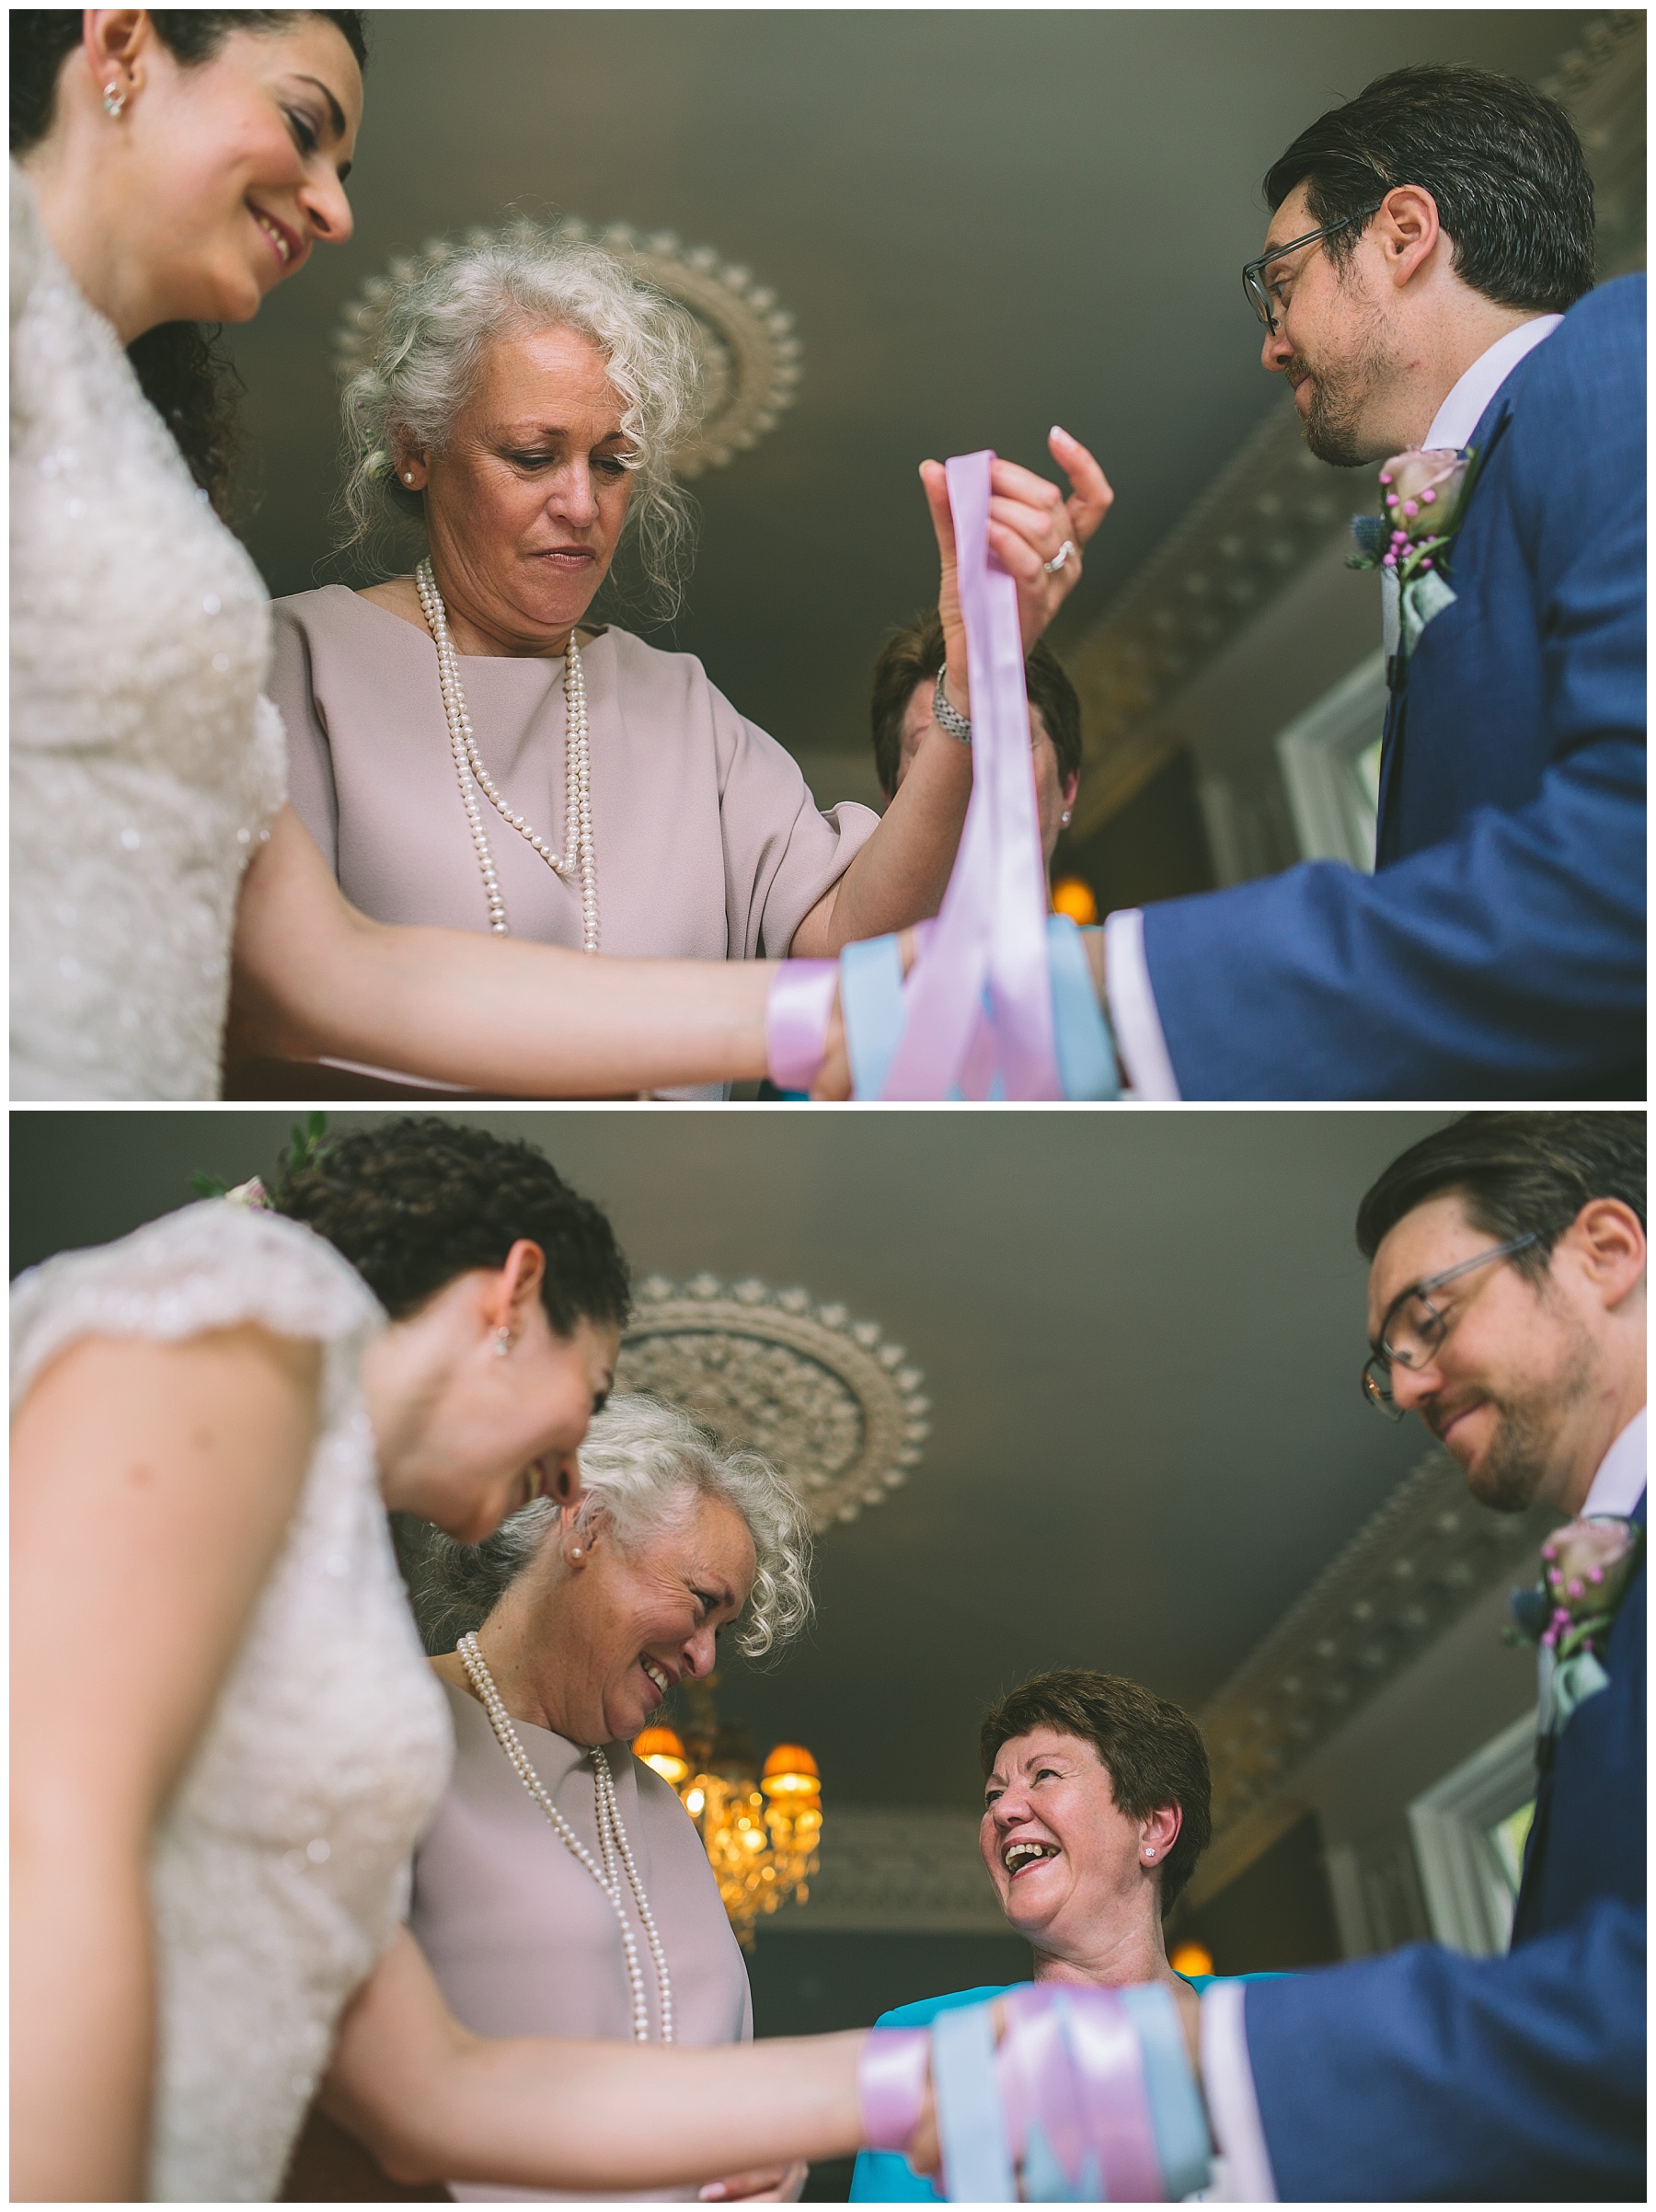 Mothers of the bride and groom bind the couples hands in a traditional handfasting